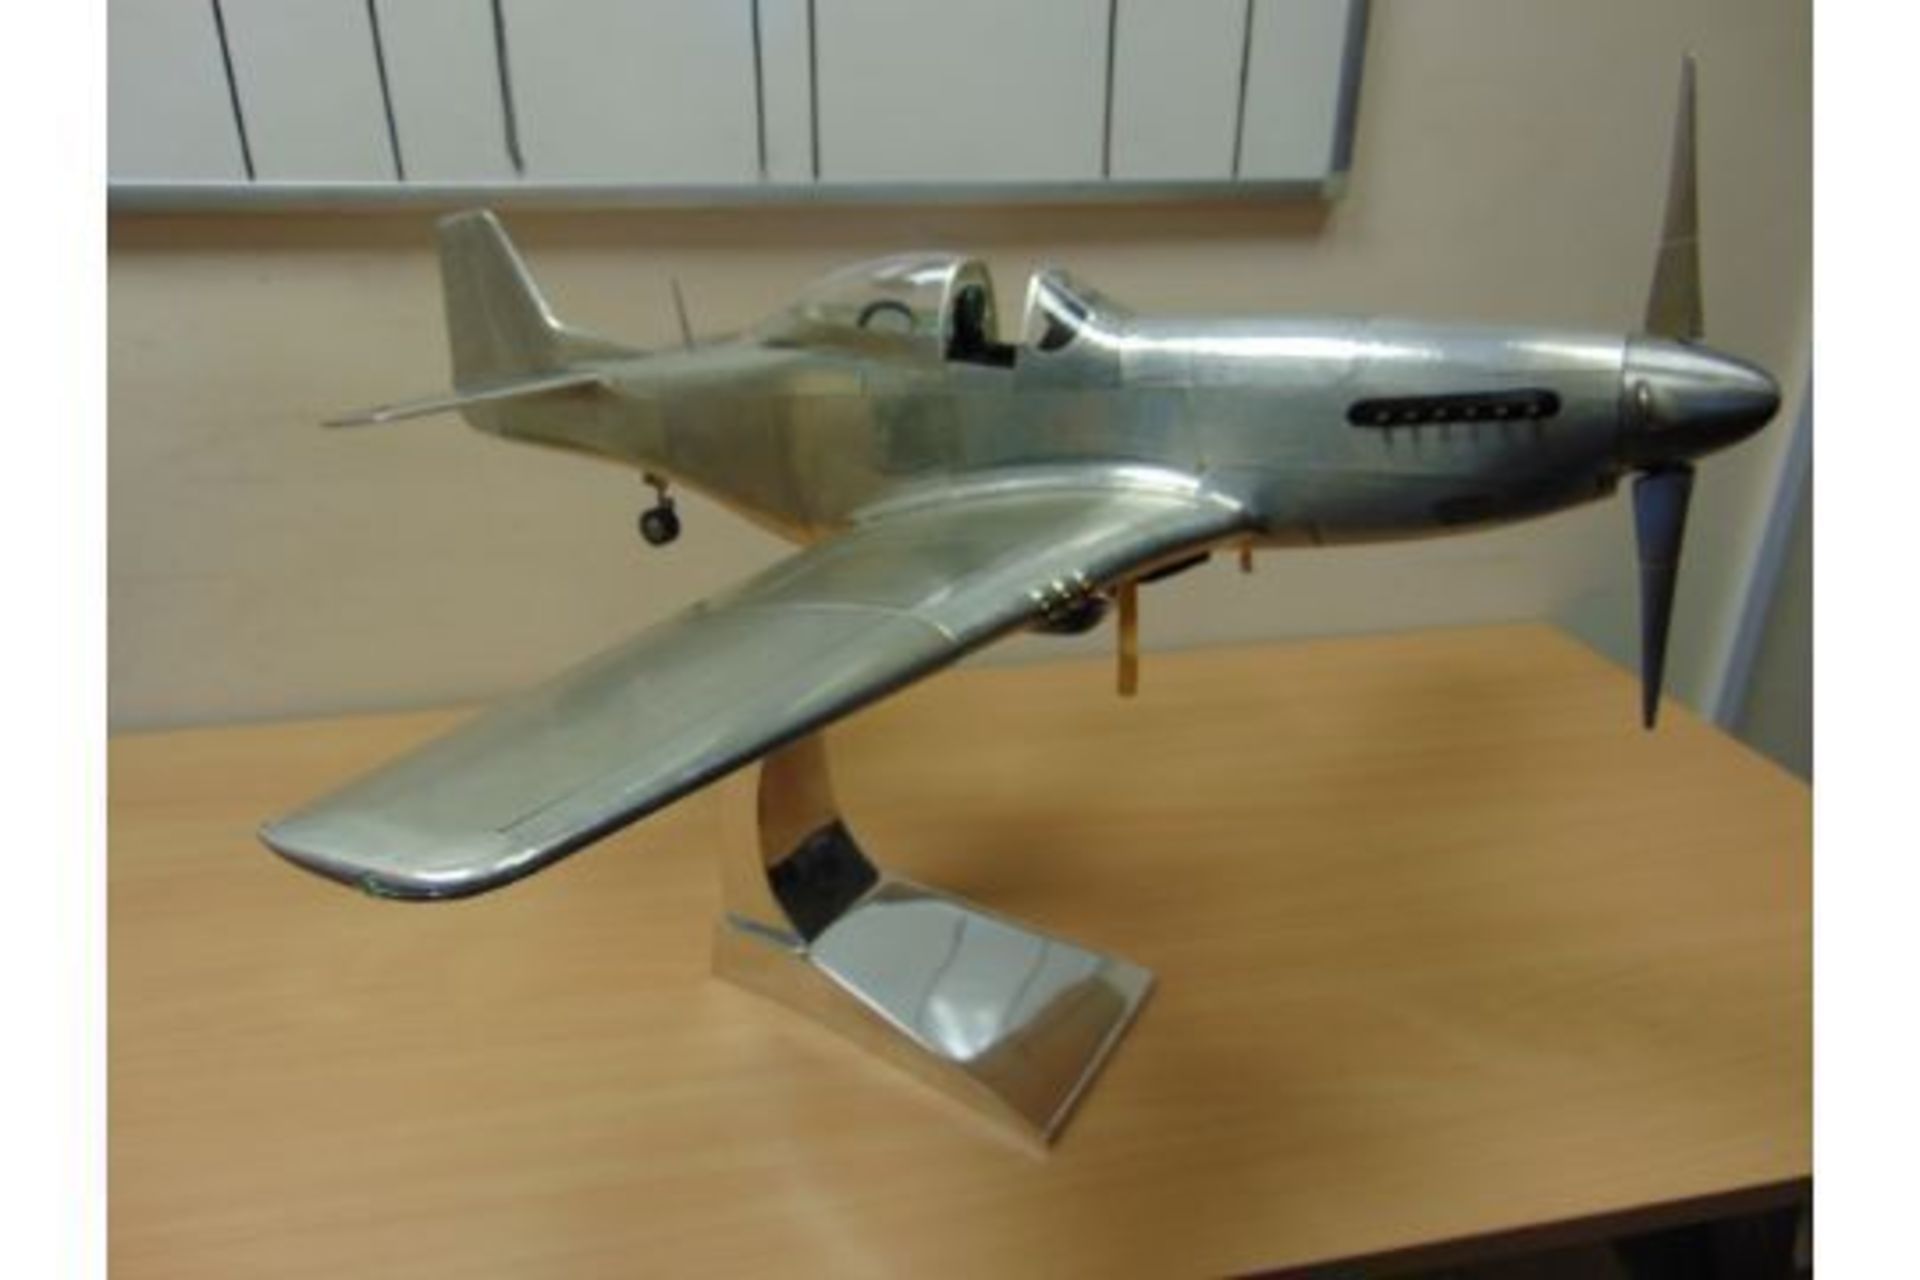 SUPERB DETAILED SCALE MODEL OF WW2 P51 MUSTANG IN POLISHED ALUMINIUM WITH RETACTABLE UNDERCARIAGE